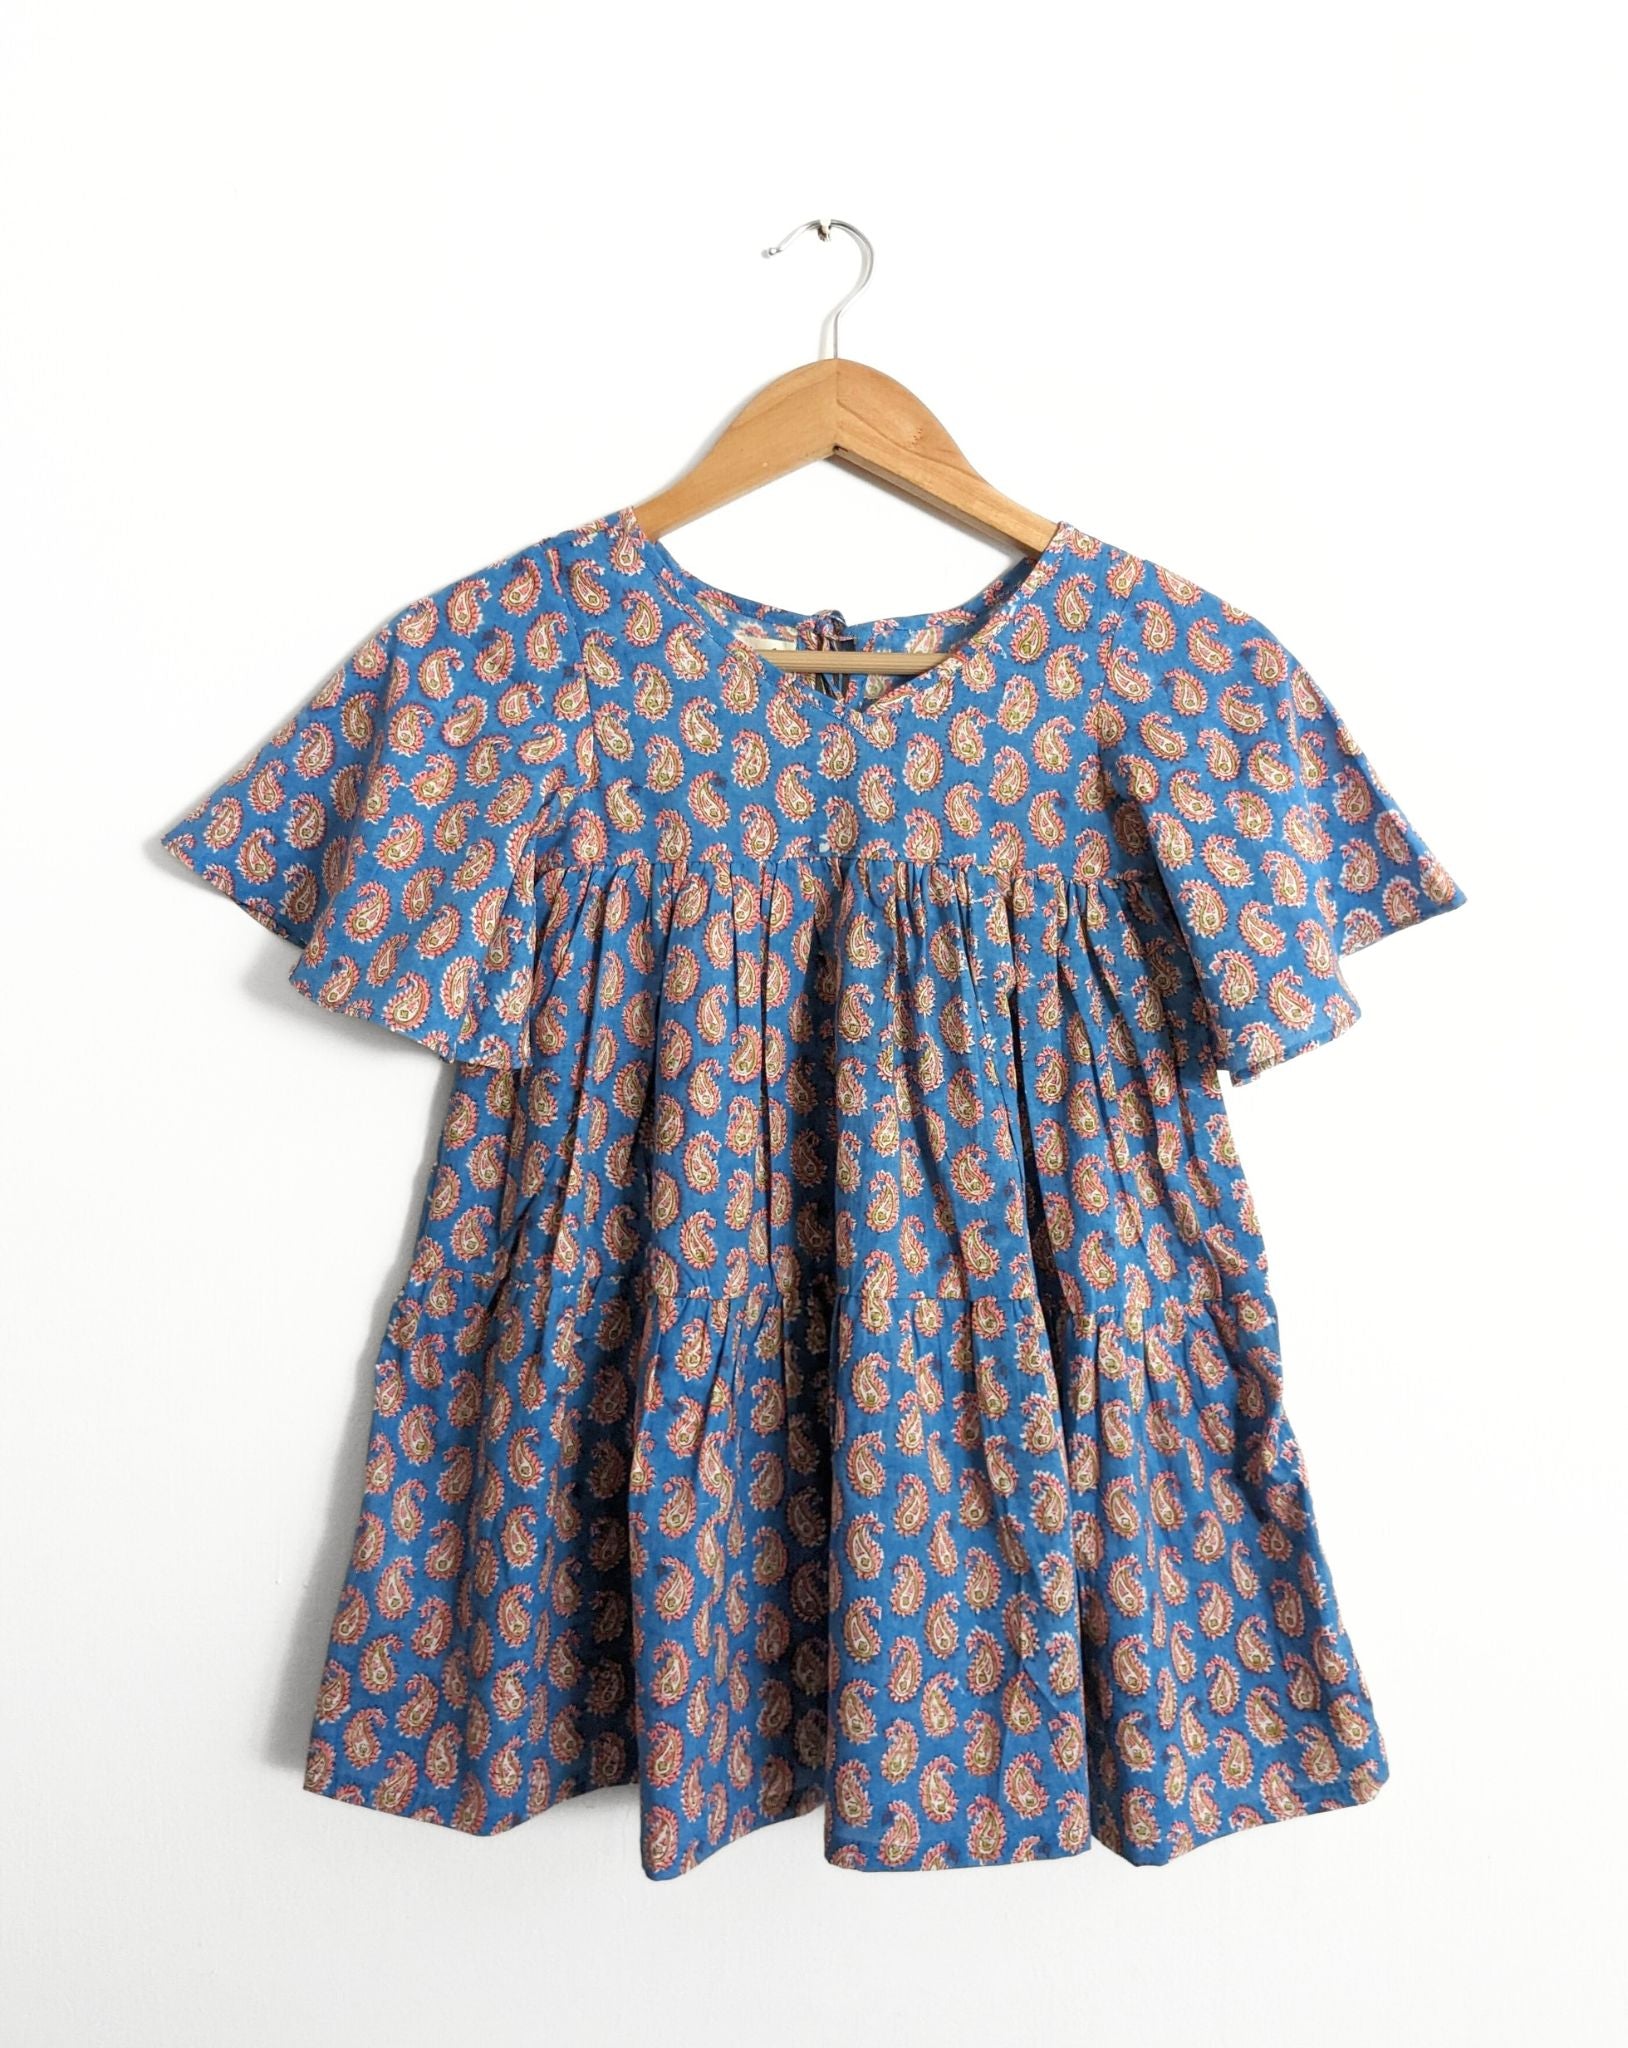 Girls Cotton Flowy Dress in Blue and Pink -2y,4y, 6y - Front